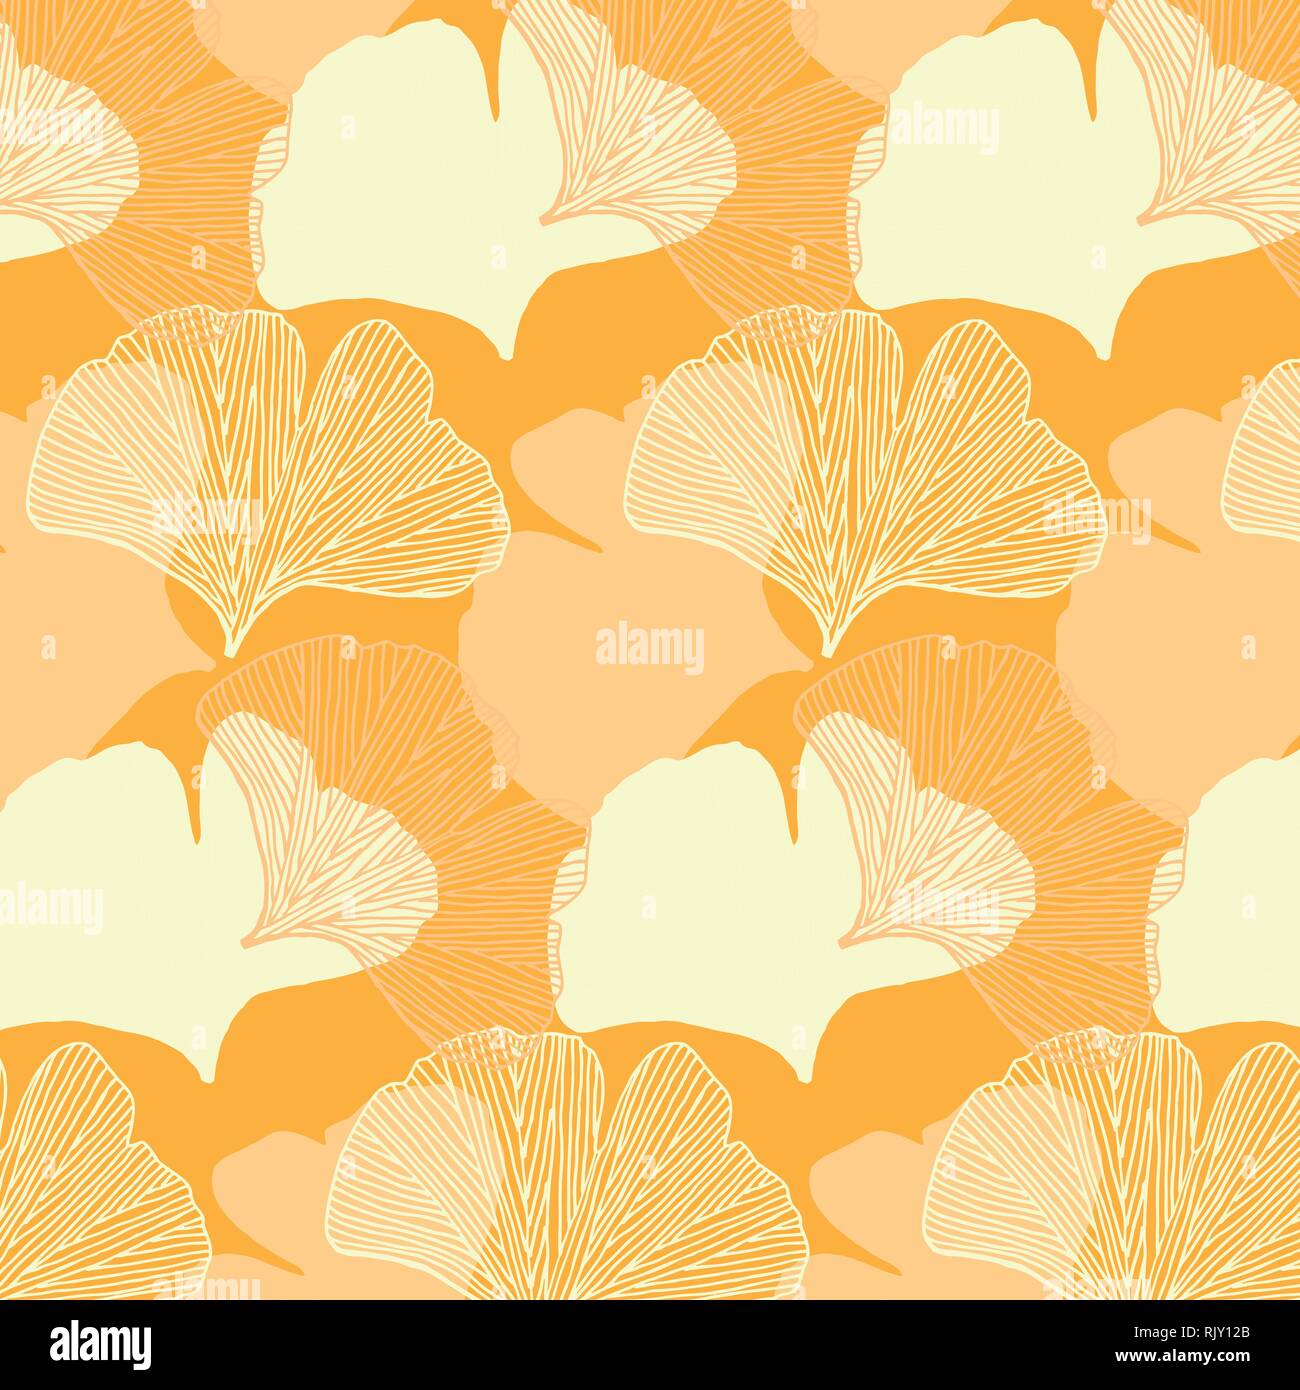 Ginkgo leaves vector pattern in yellow and orange colors palette Stock Vector